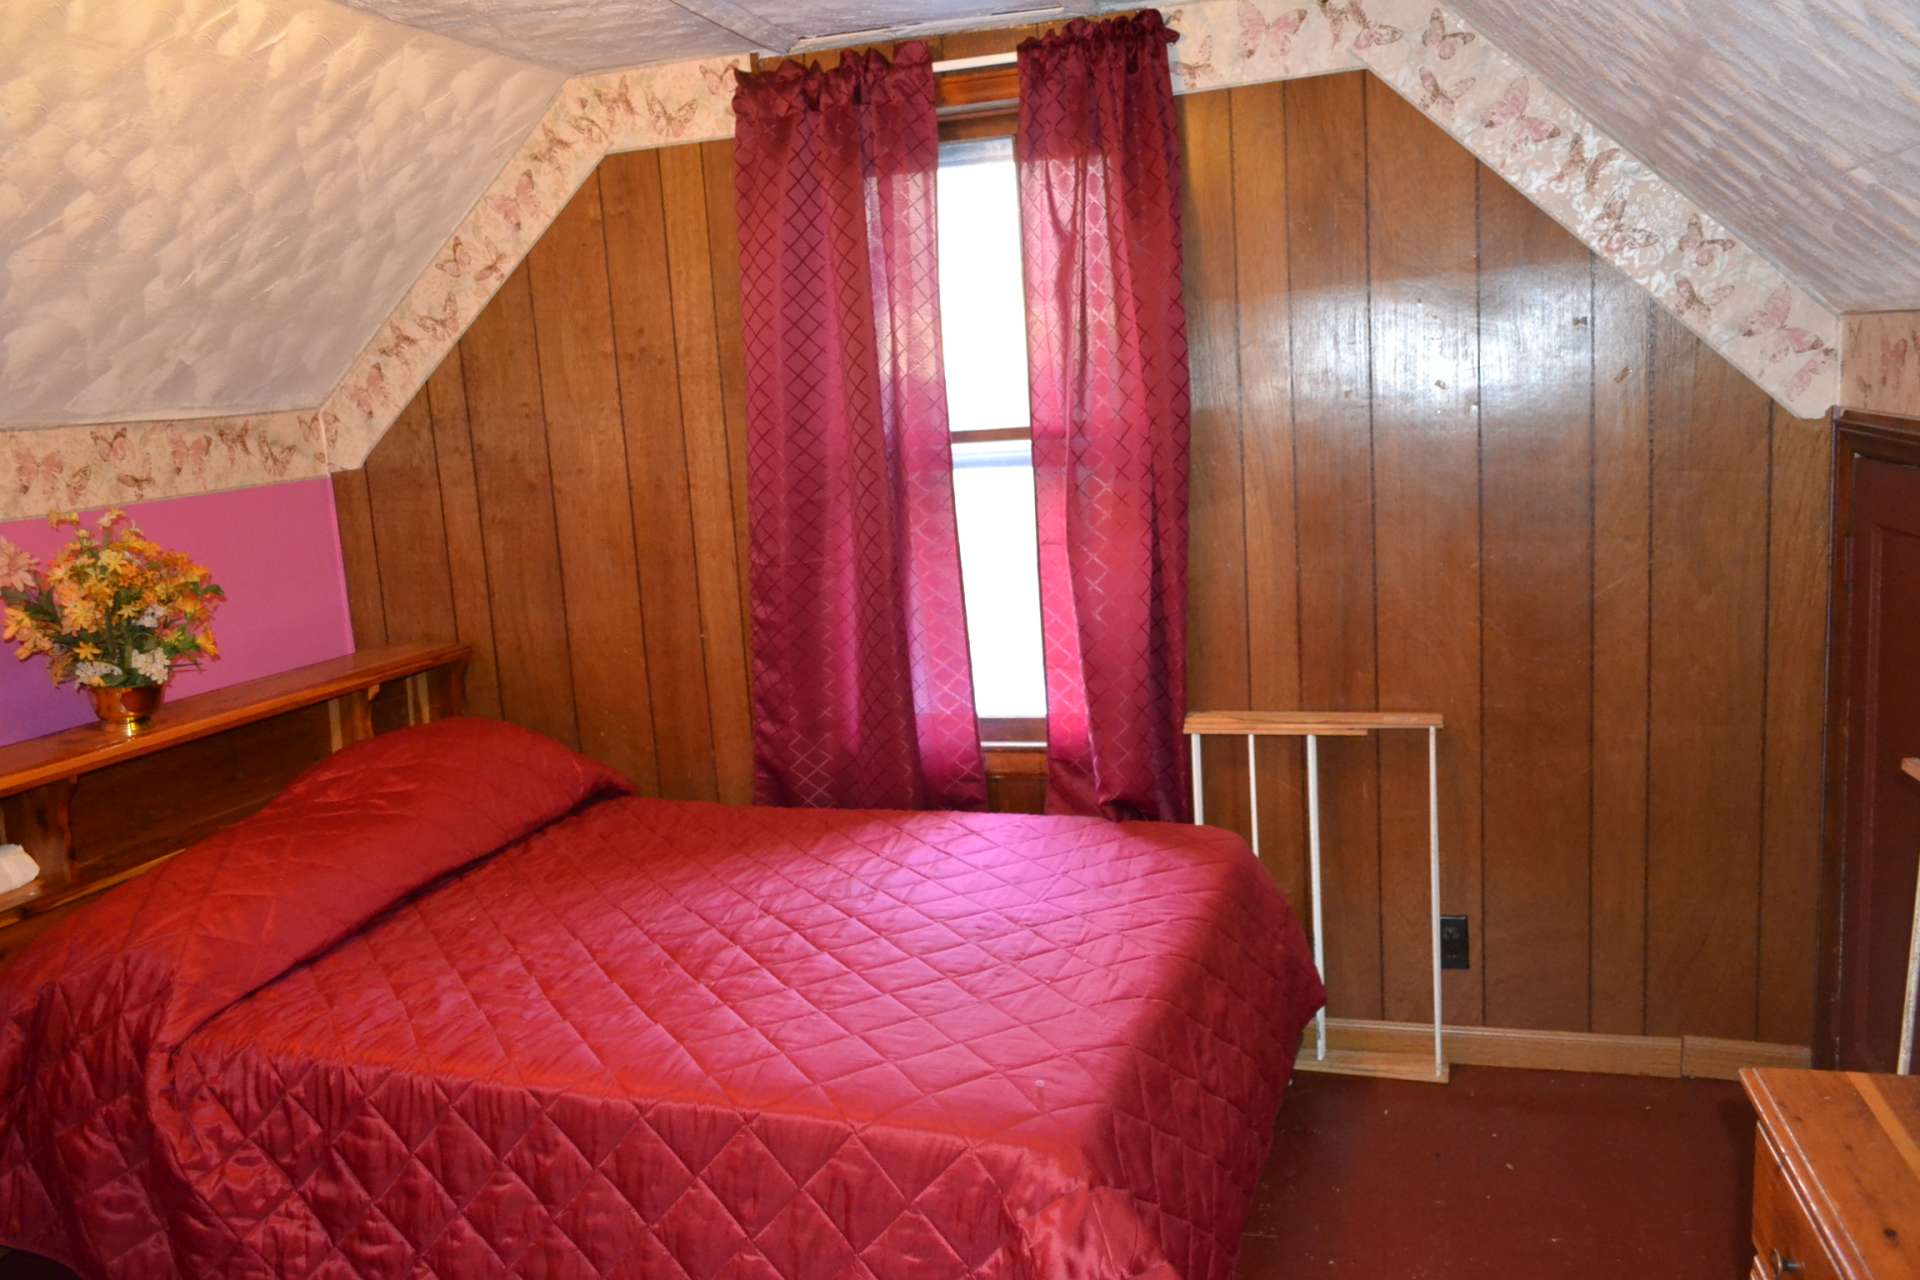 There are two charming bedrooms on the upper level.